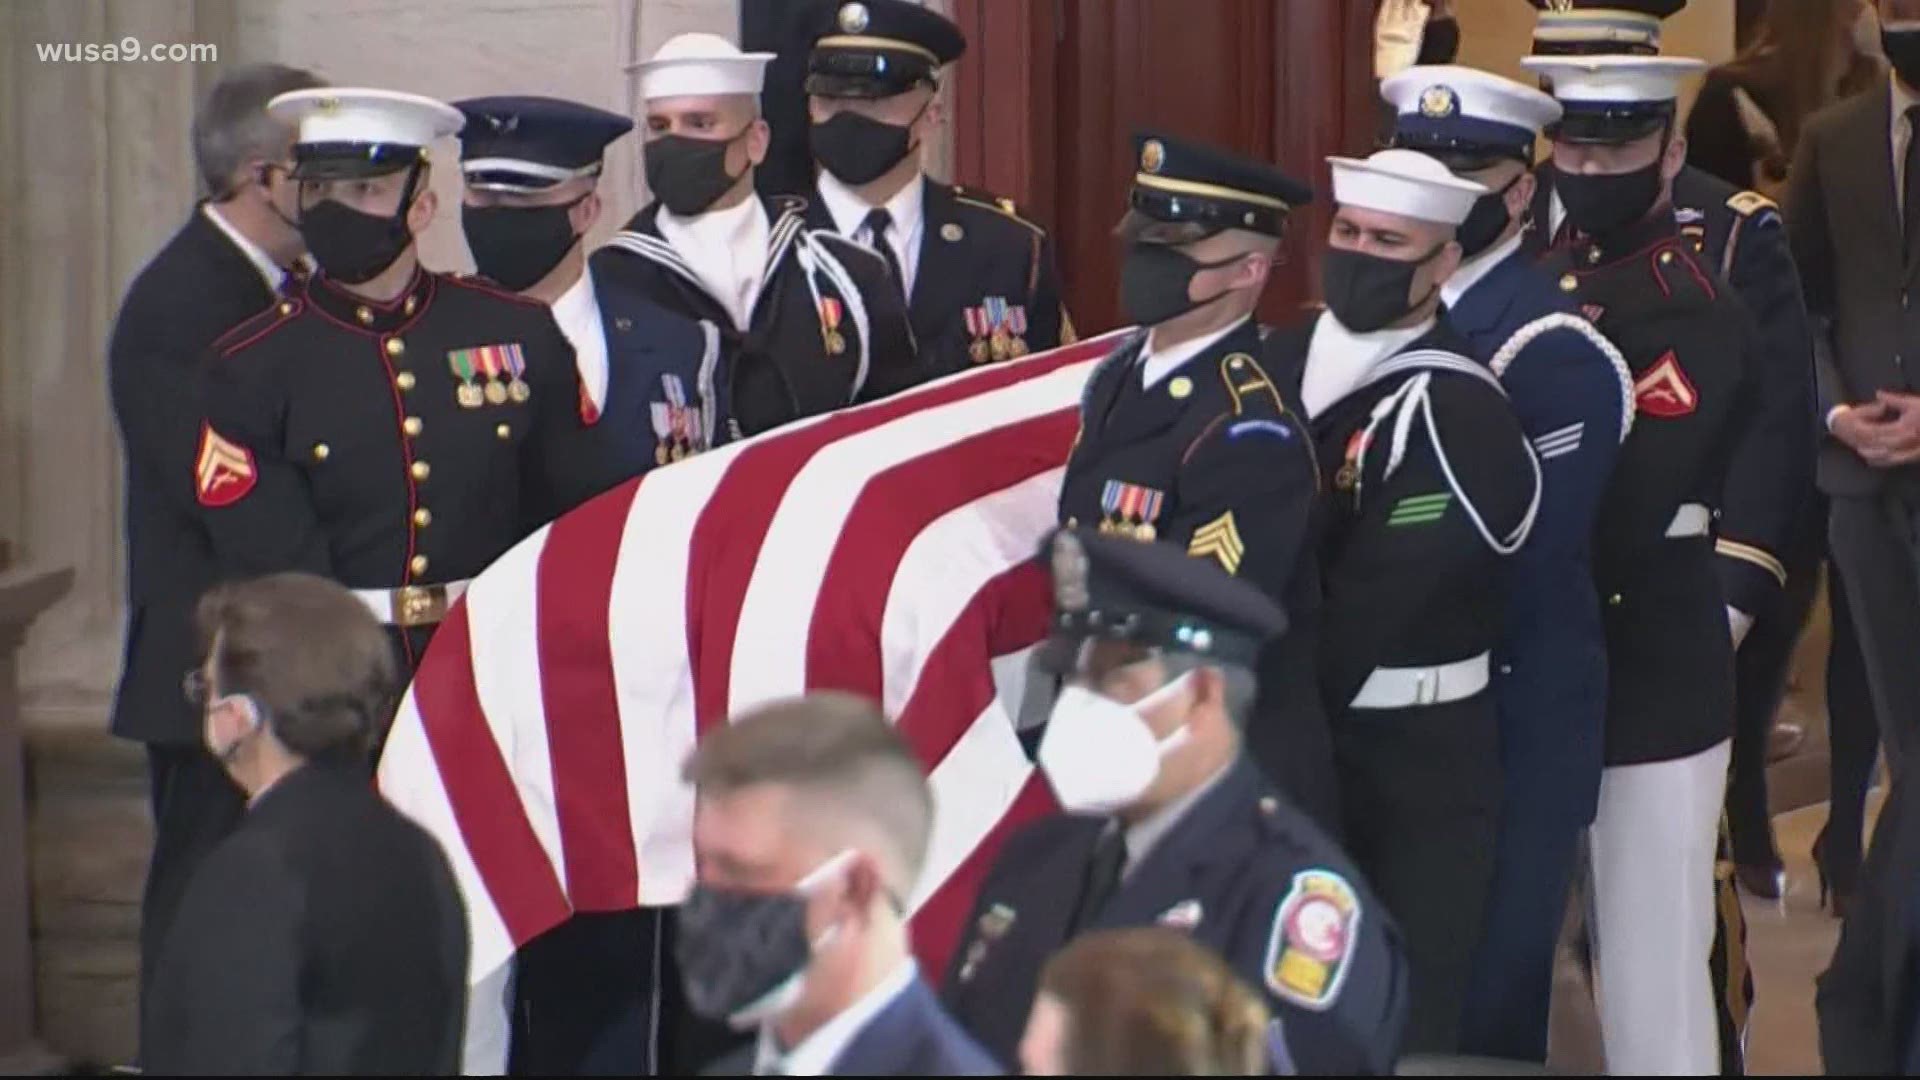 There were many heartfelt moments during the ceremony that honored Capitol Police Officer William "Billy" Evans